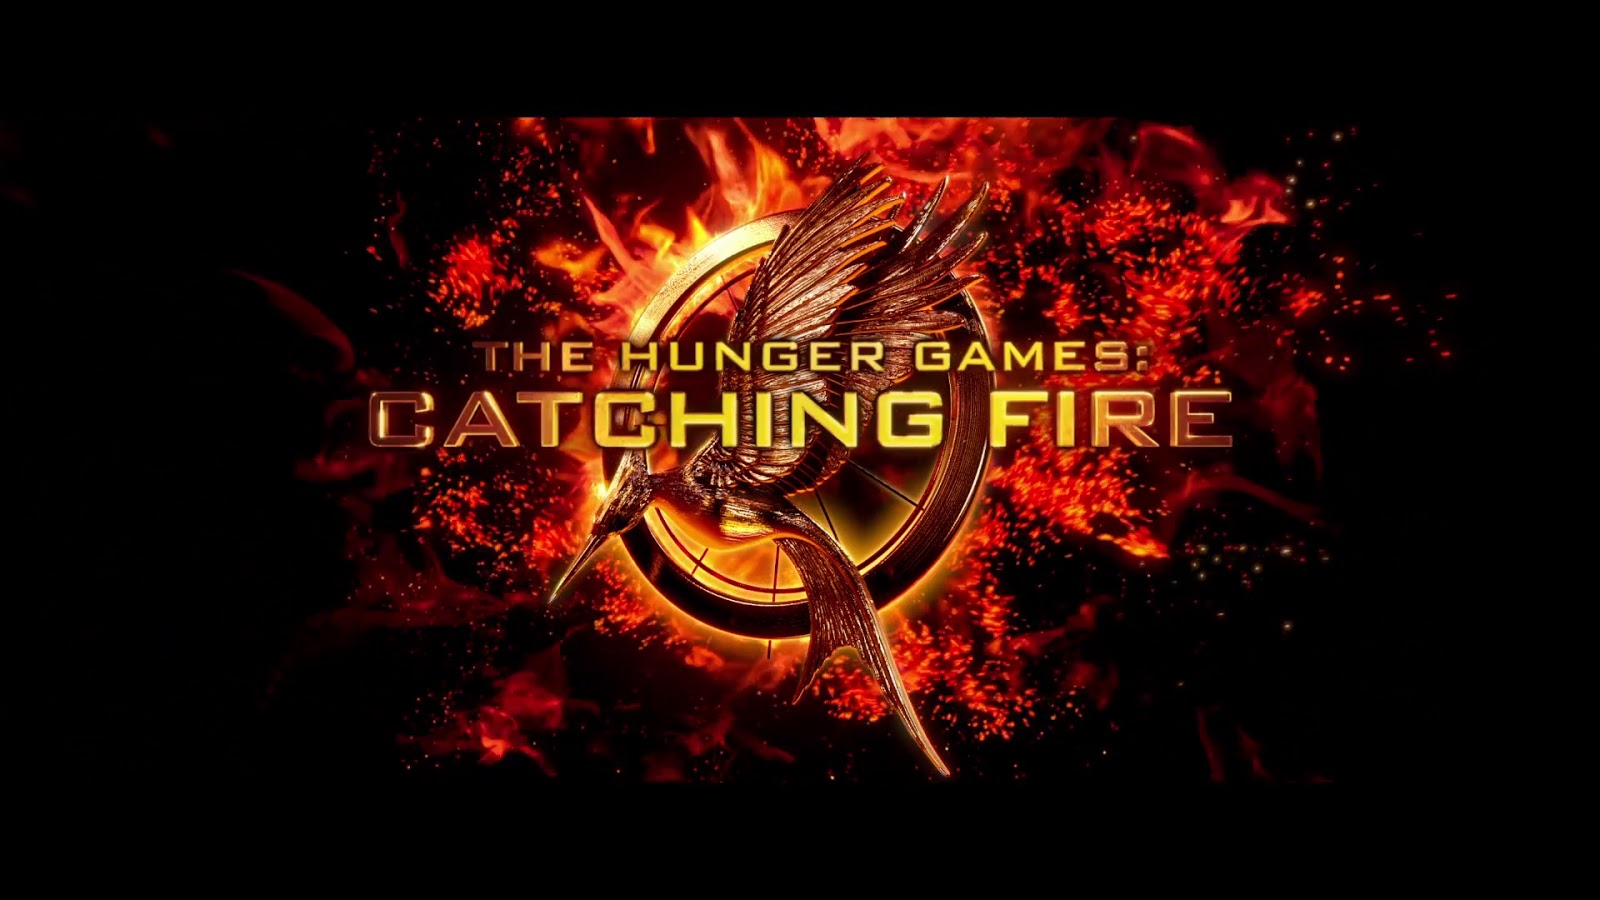 The Hunger Games Catching Fire Book Cover Photos ~ The ...